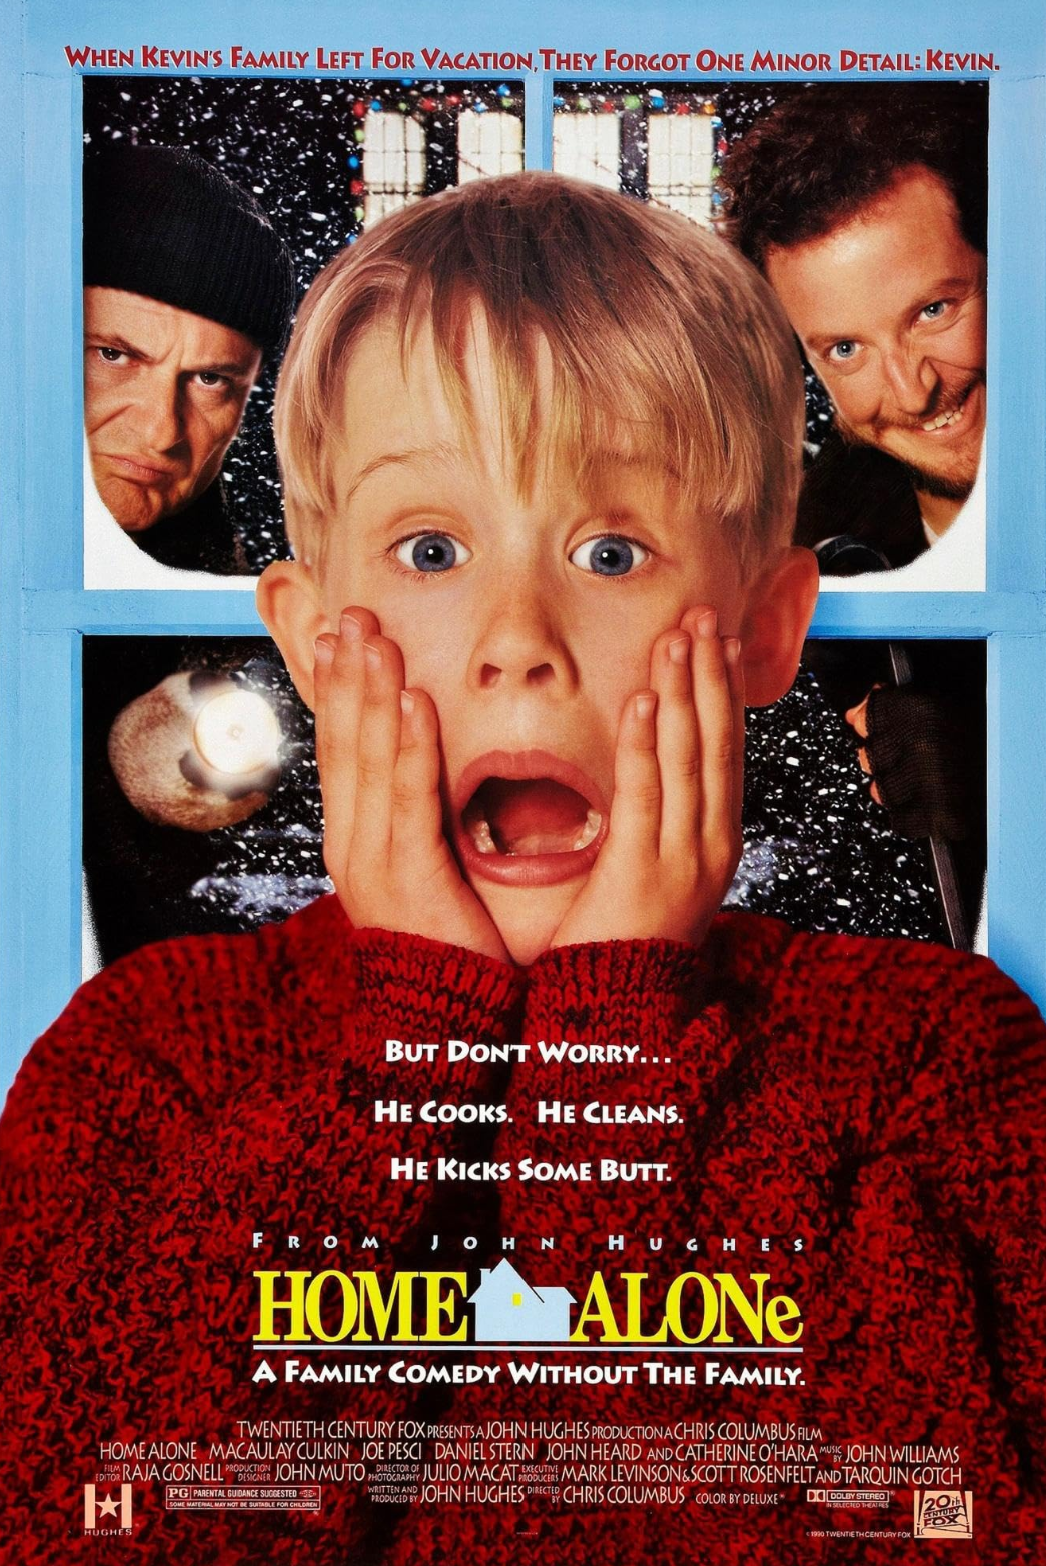 Loved-christmas-movies-for-the-whole-family---Home-Alone-An-eight-year-old-troublemaker,-mistakenly-left-home-alone,-must-defend-his-home-against-a-pair-of-burglars-on-Christmas-Eve.png